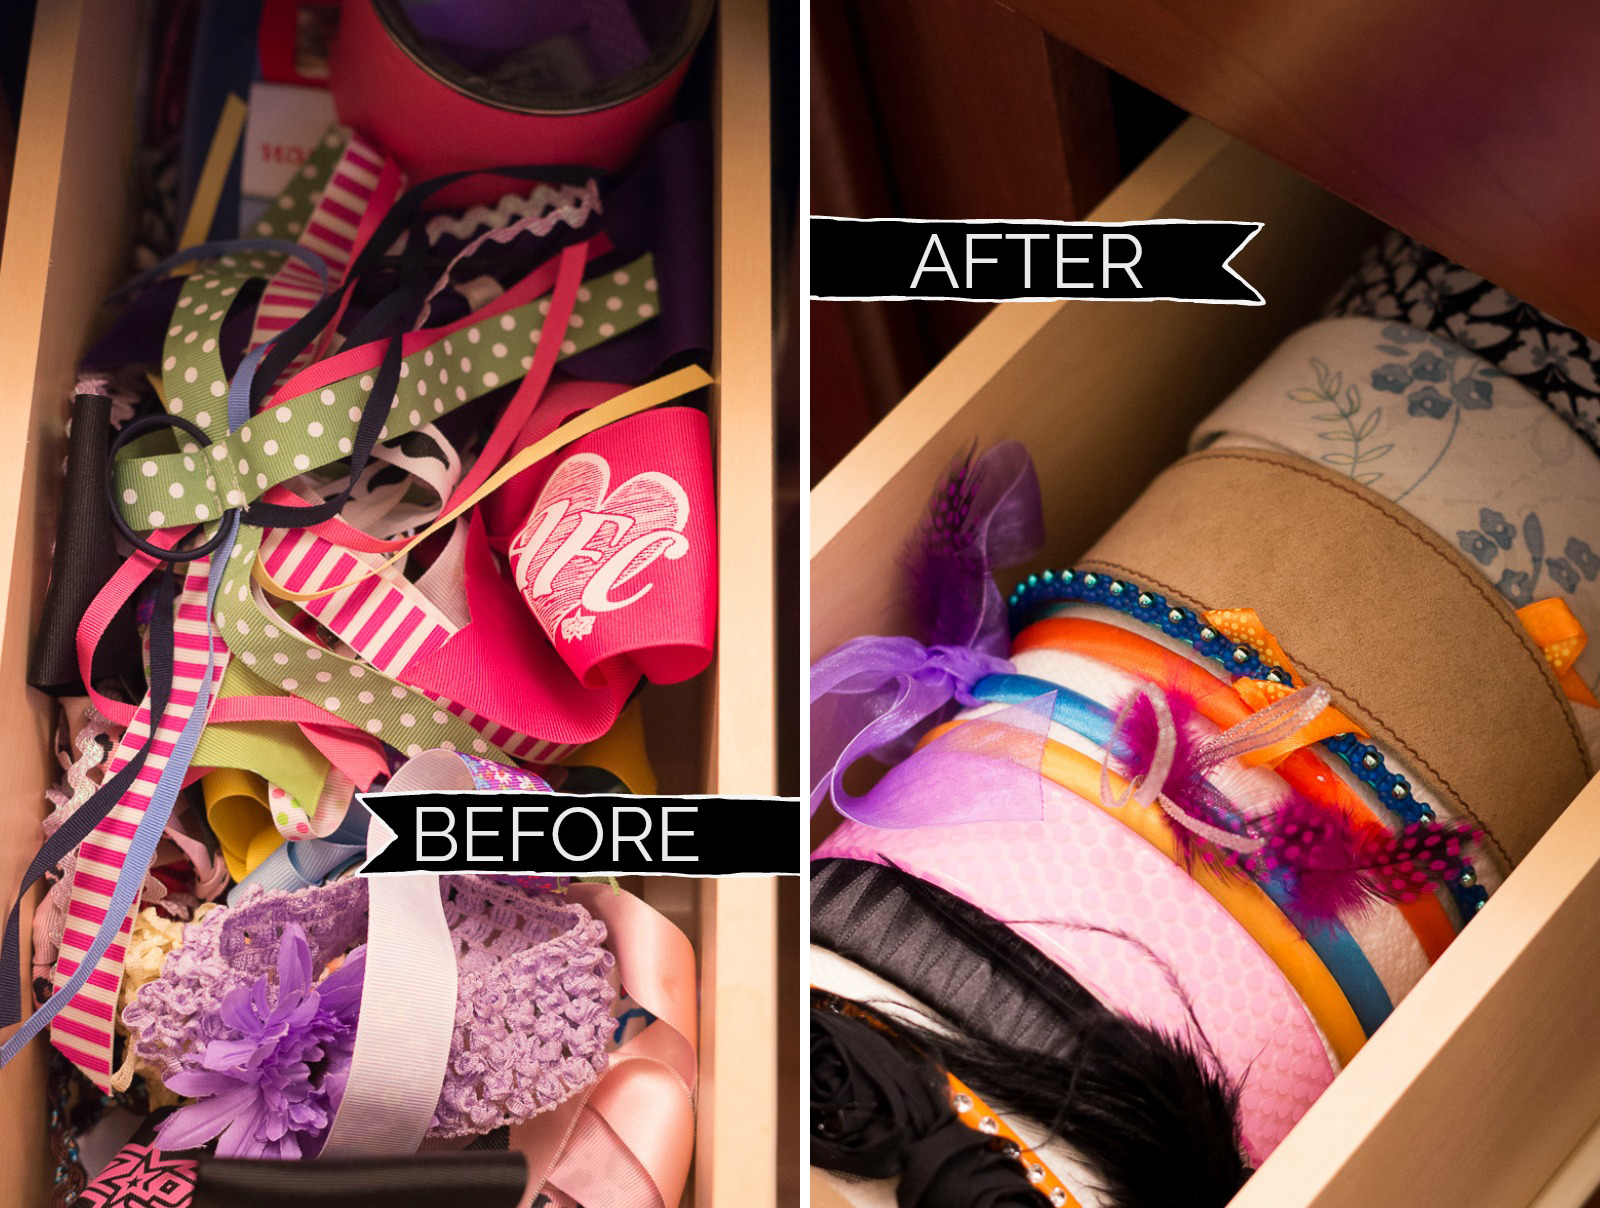 Bathroom Organization Ideas: Use a canister in a drawer to organize headbands and ribbons